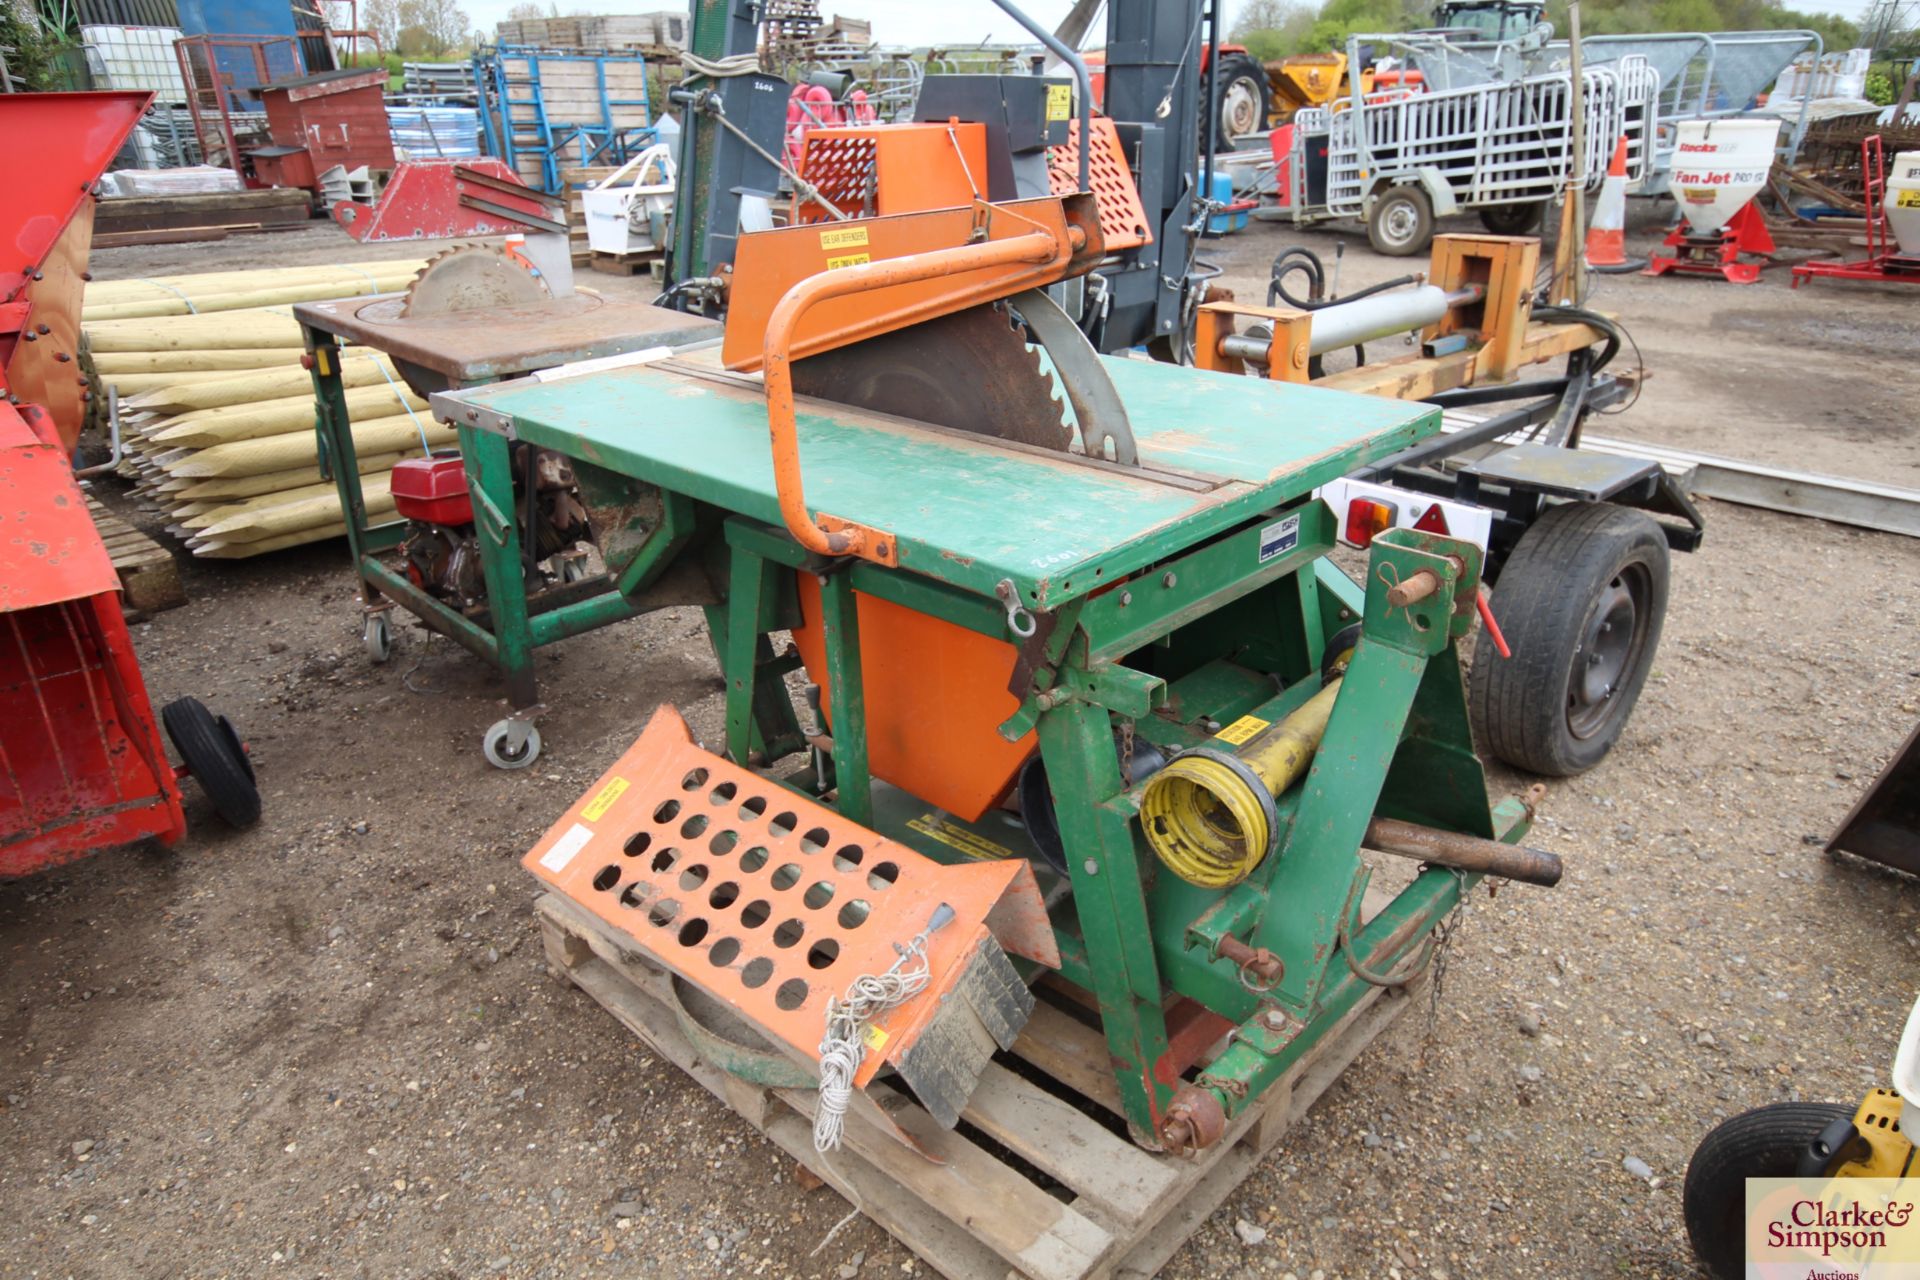 Transaw linkage mounted PTO driven saw bench. V